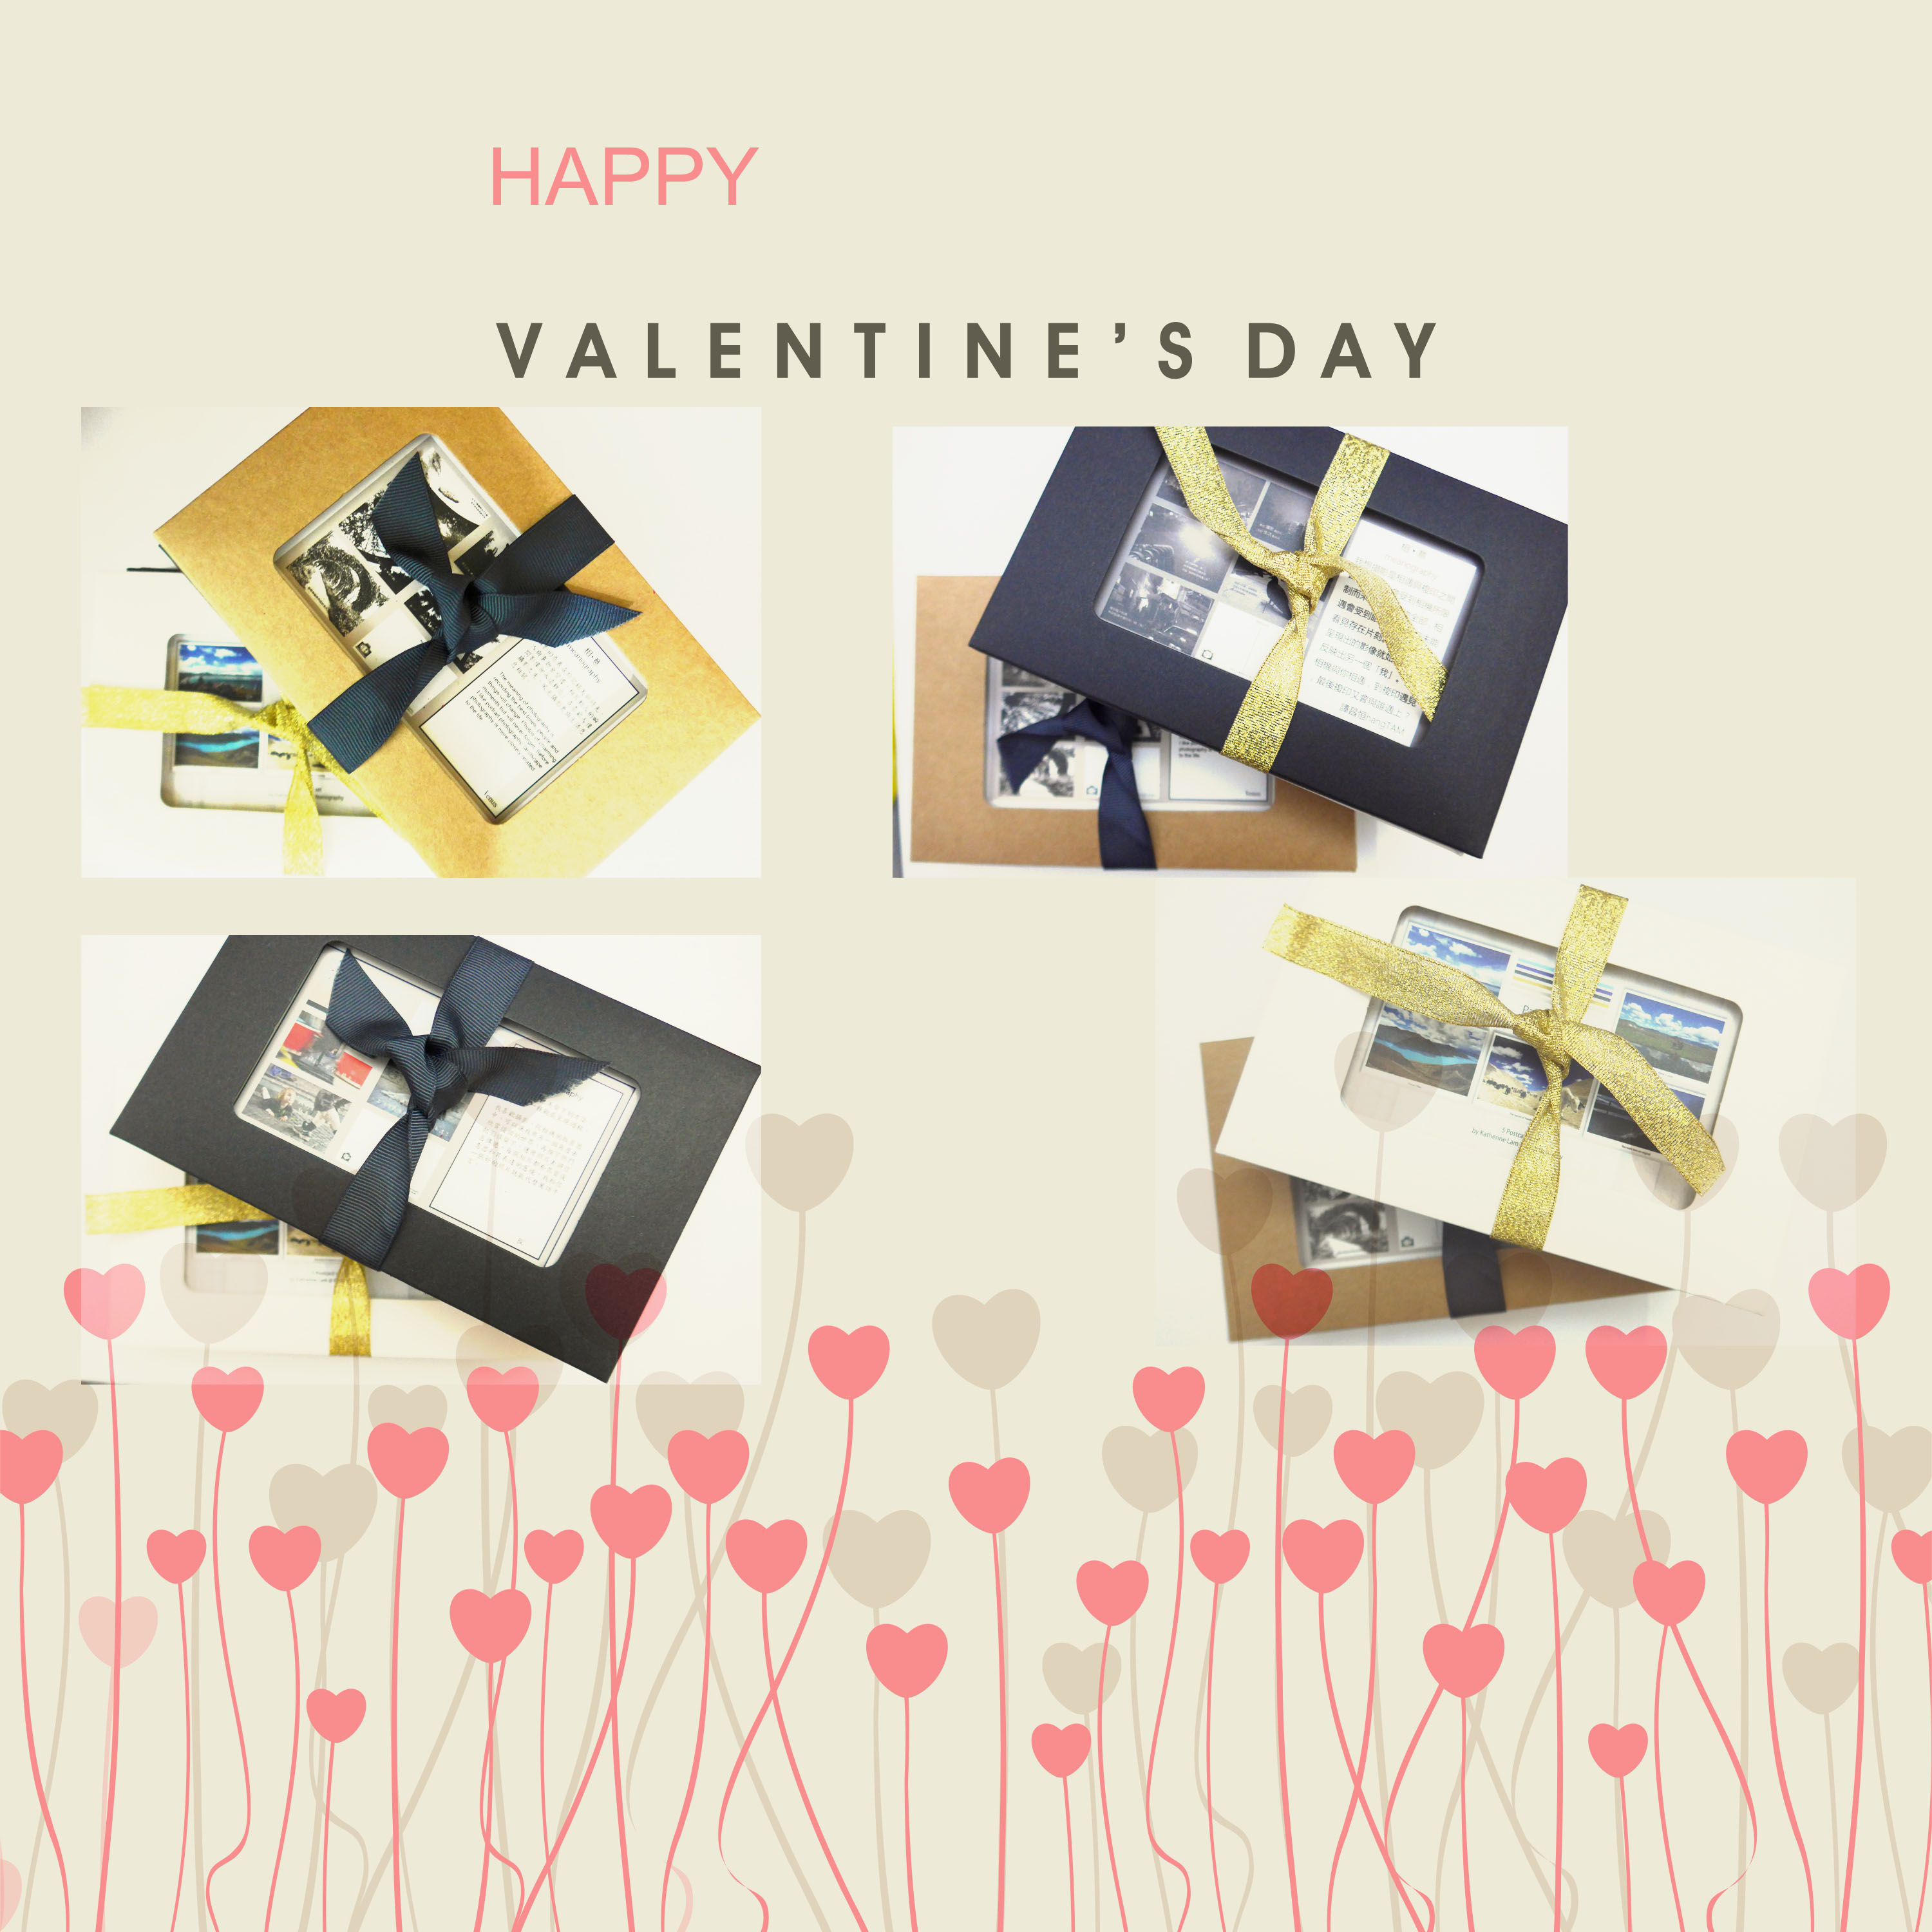 Happy Valentine’s Day ! Gifts for her Gifts for him